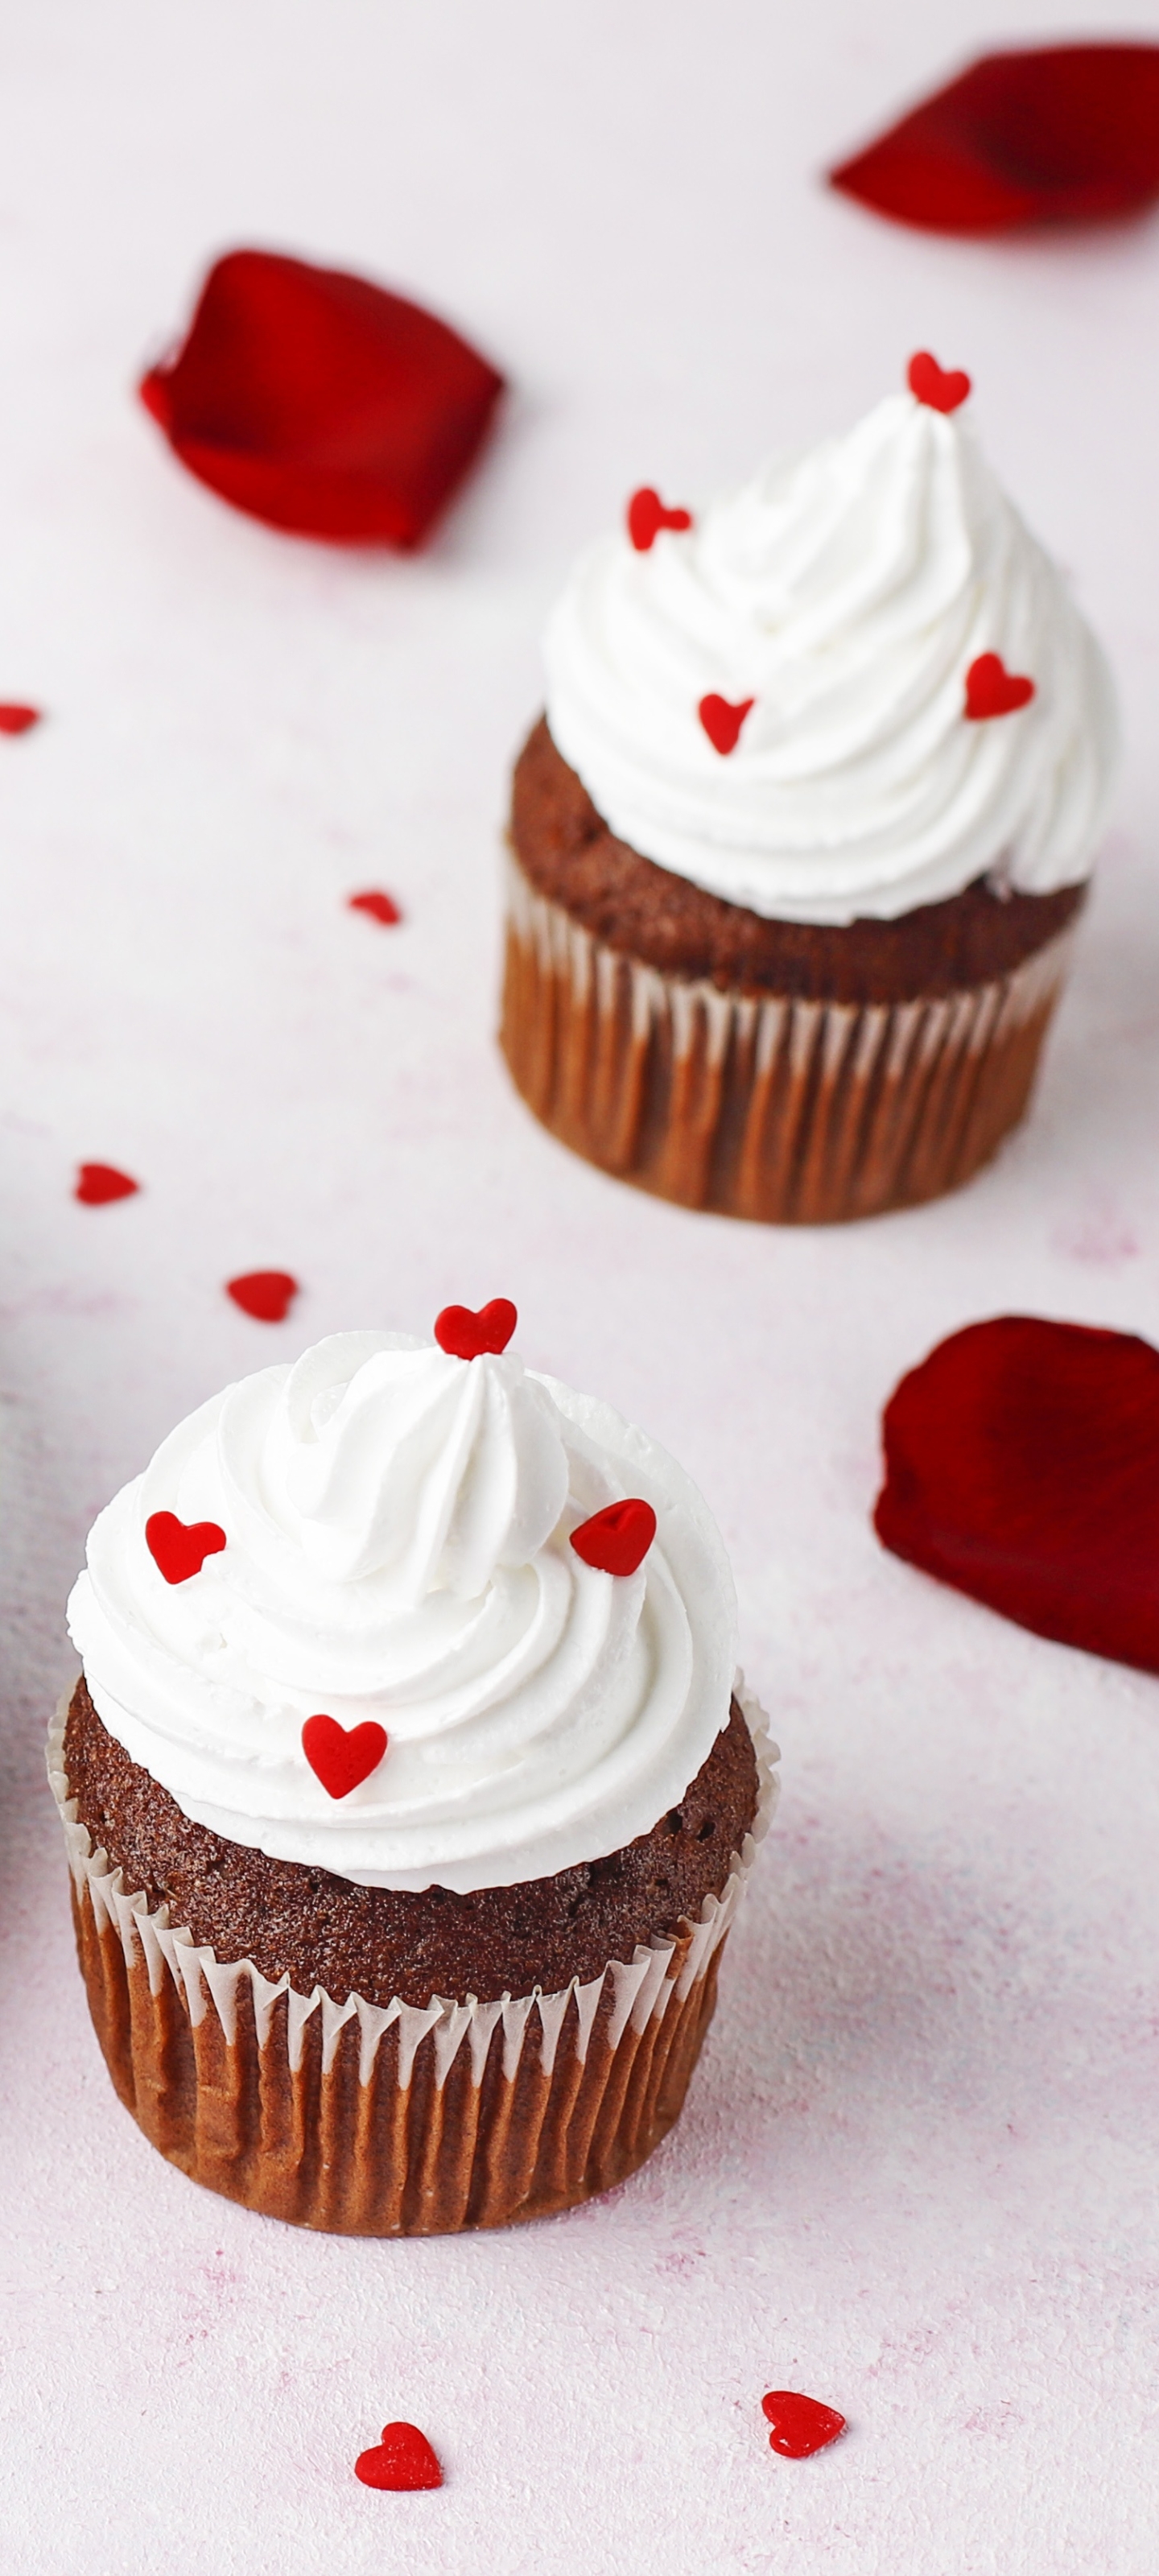 Cream Topped Cupcakes with Hearts and Roses ♥